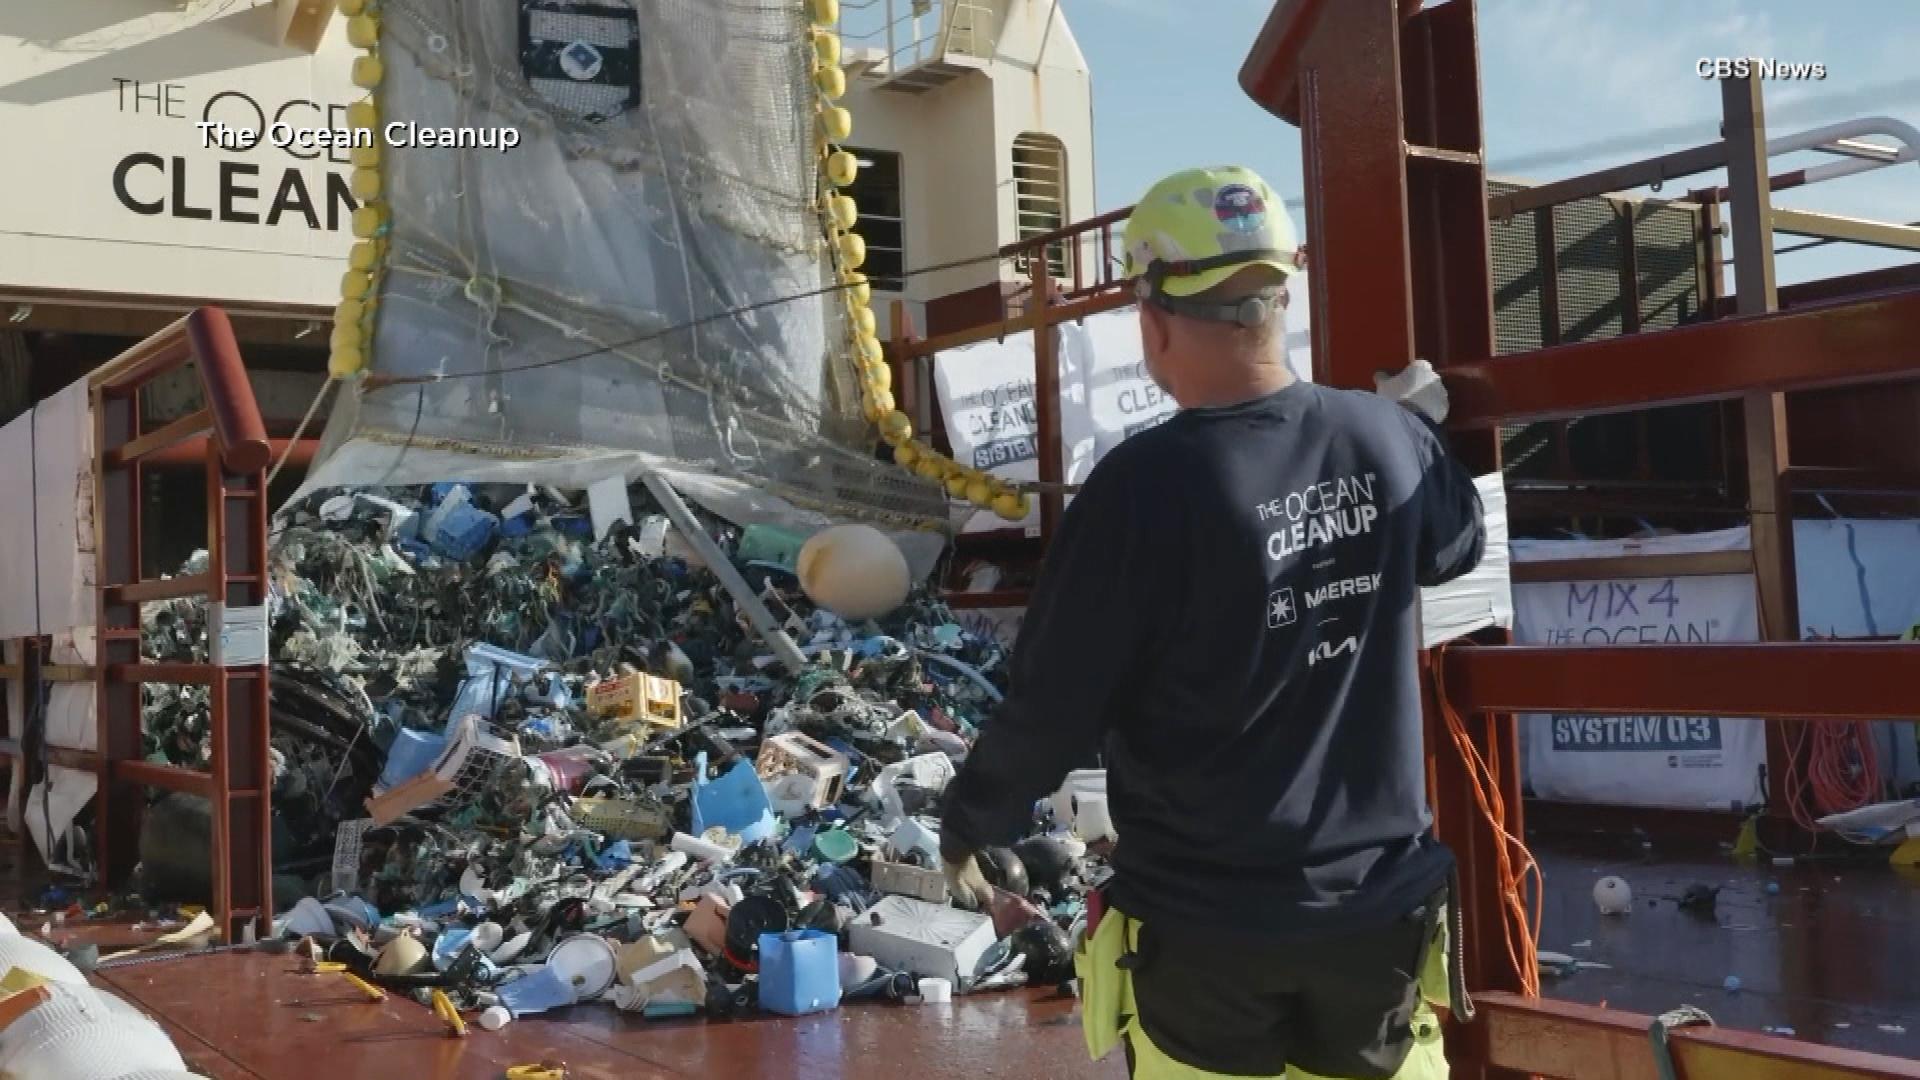 Garbage dumped out on an ocean cleanup vessel